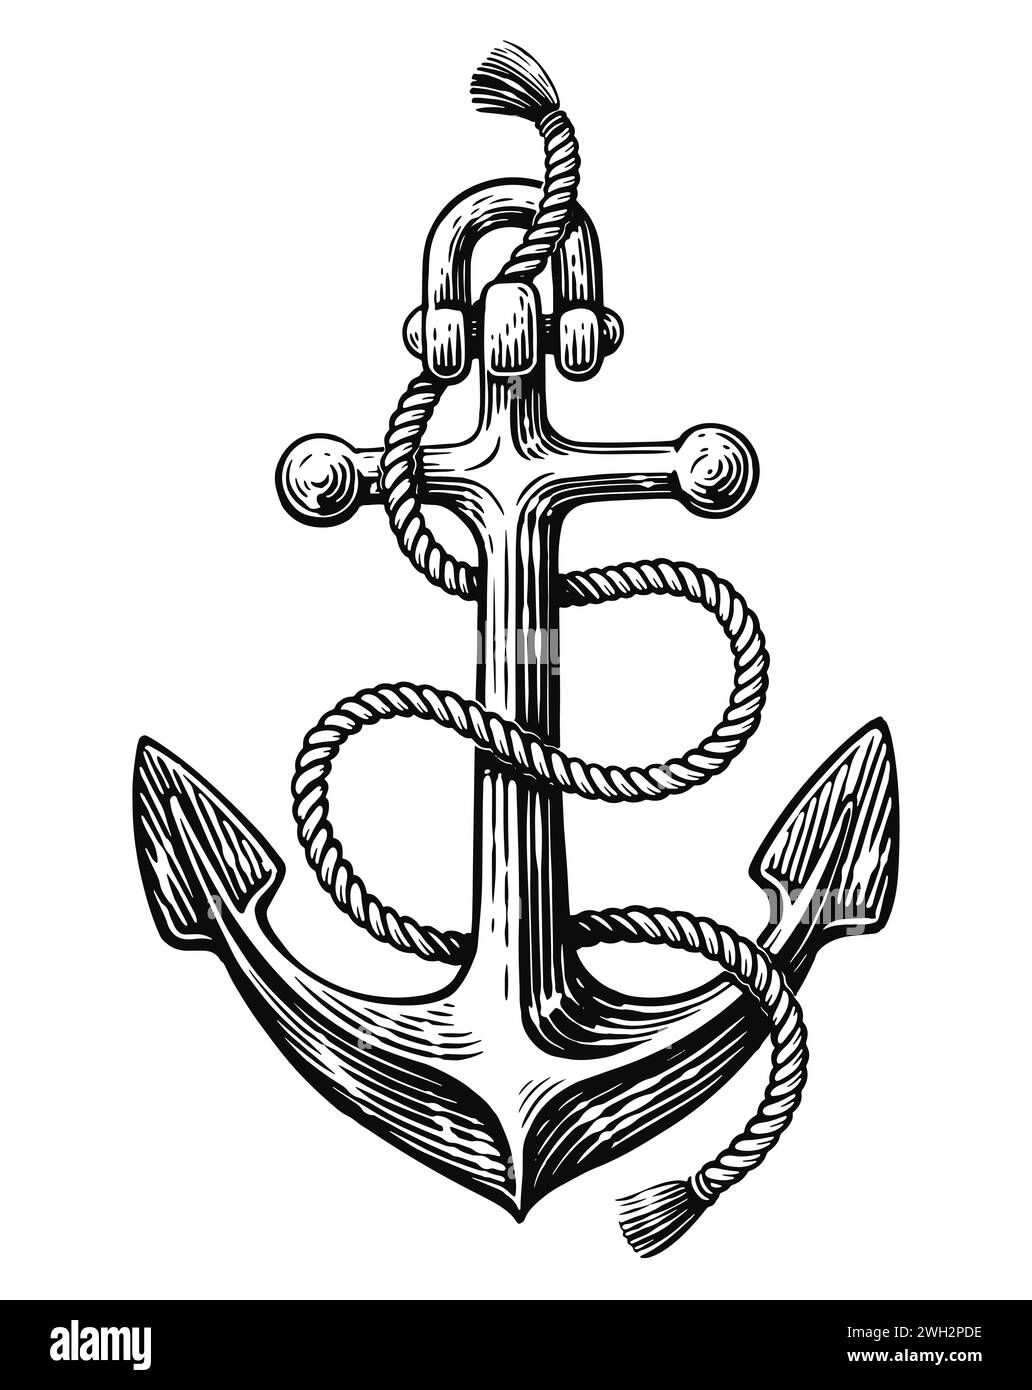 Sketch of ship nautical anchor with rope. Hand drawn vintage illustration engraving style Stock Photo